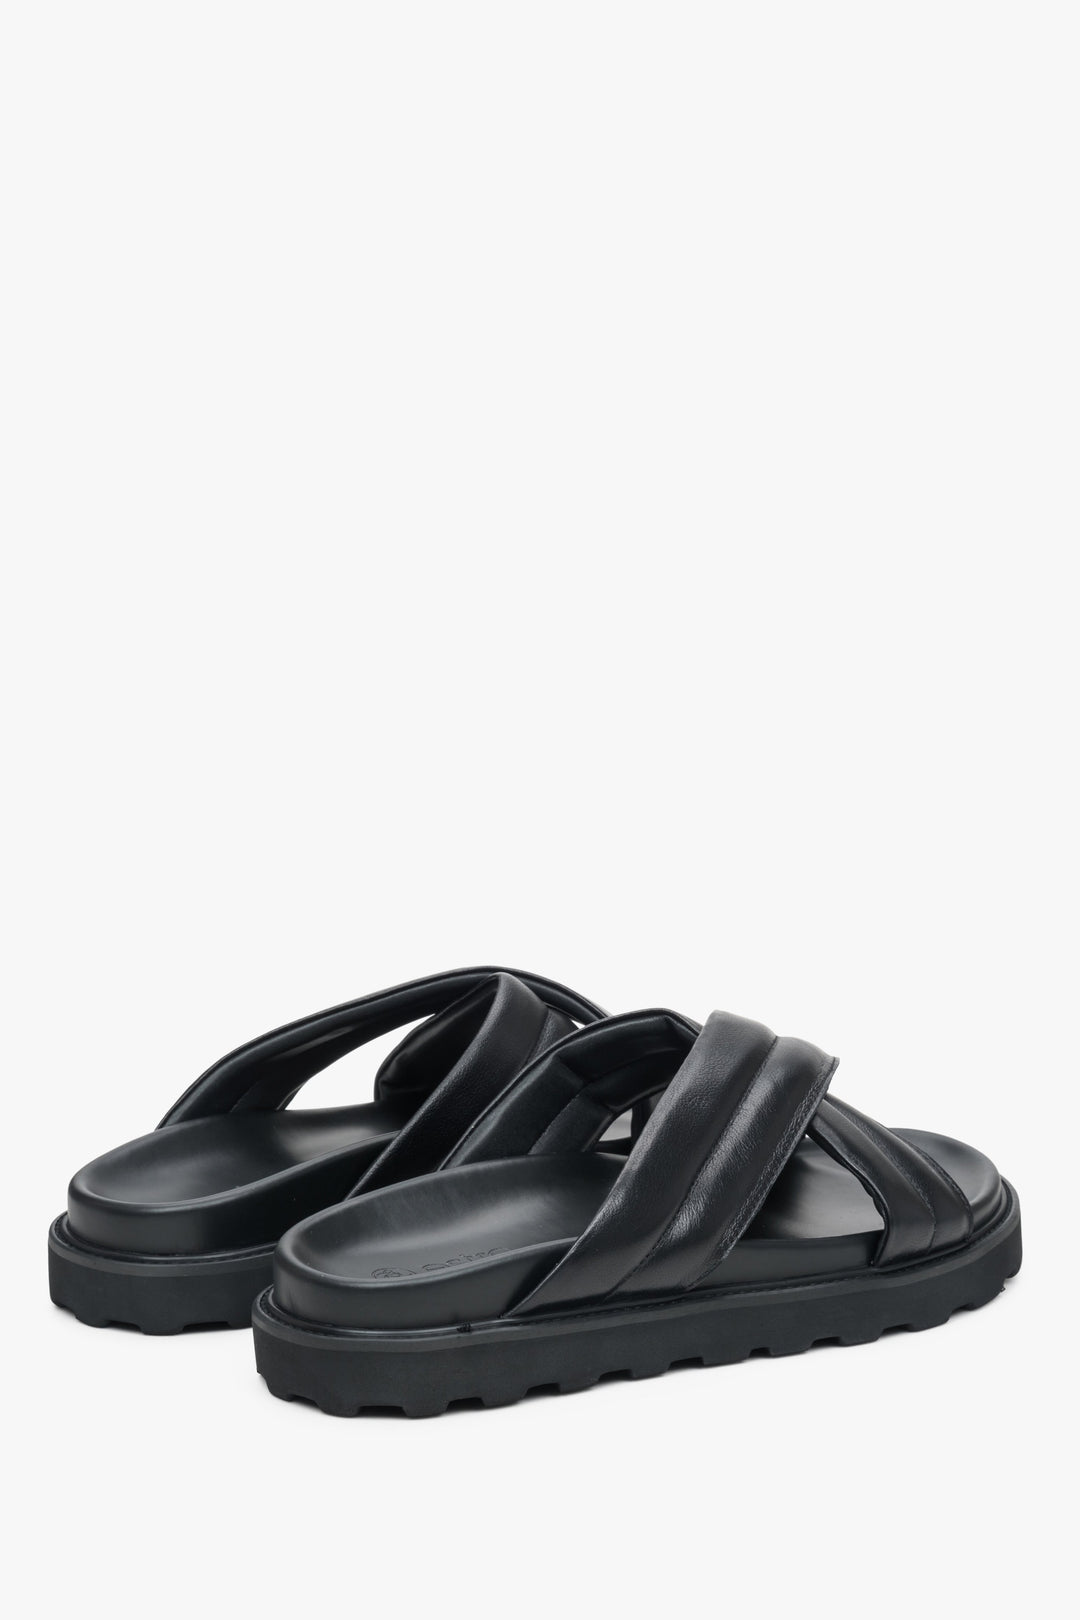 Estro men's black leather  sandals with a soft sole - close-up on the shoe's side and heel line.